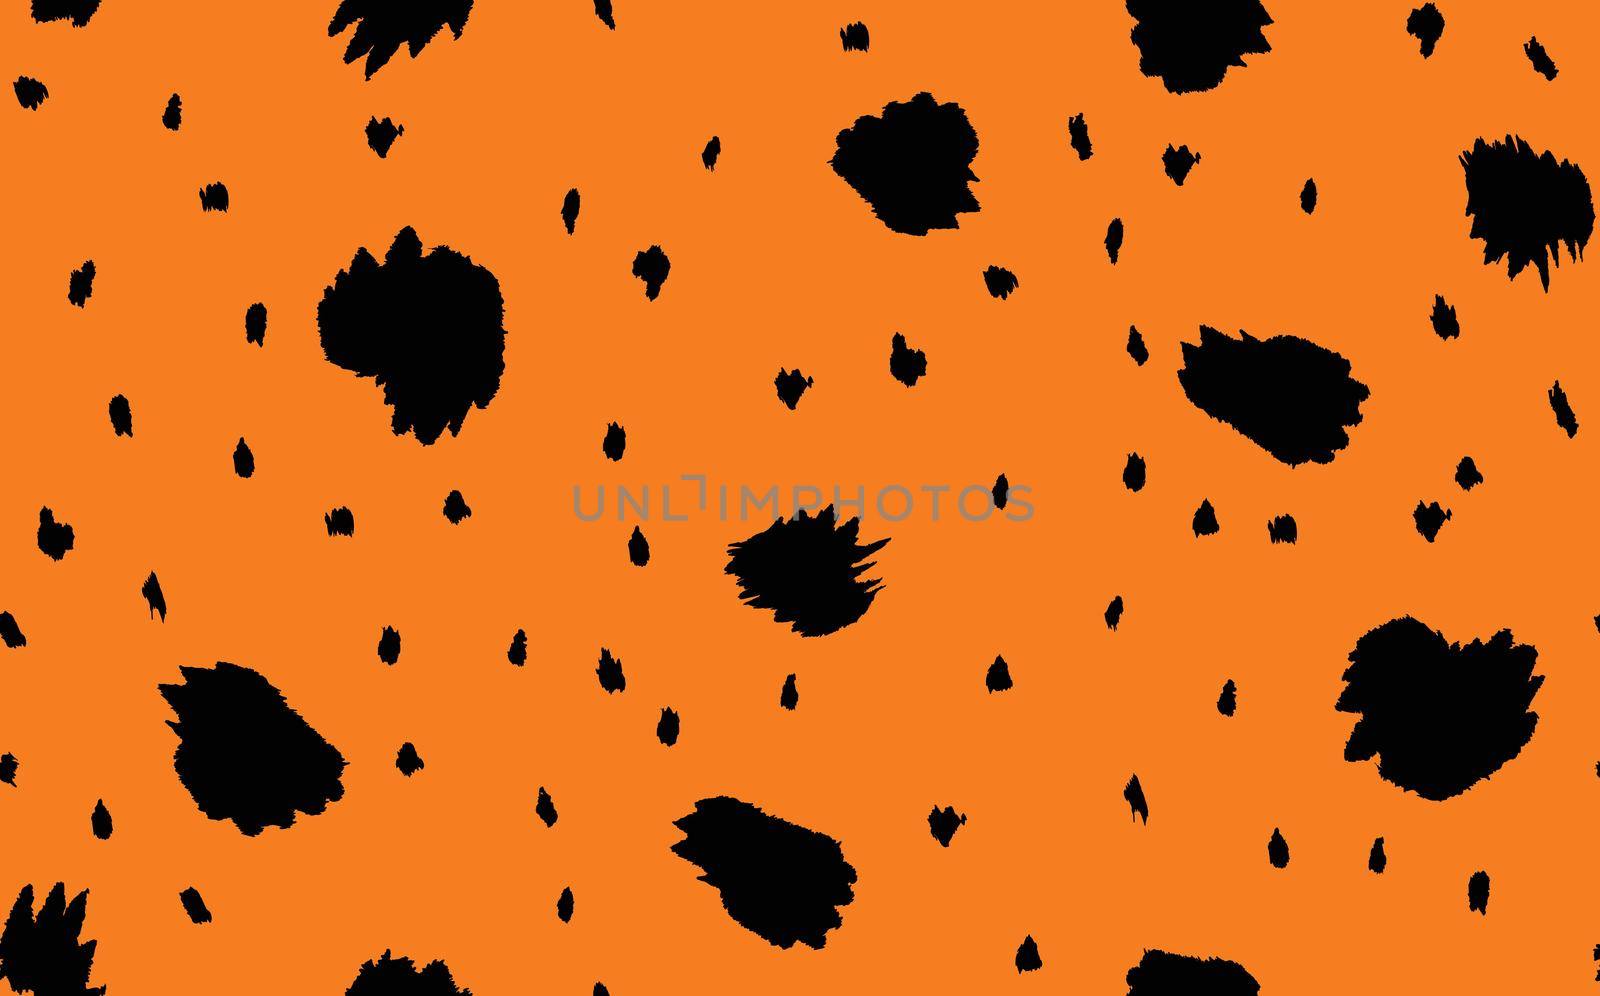 Abstract modern leopard seamless pattern. Animals trendy background. Orange and BLACK decorative vector stock illustration for print, card, postcard, fabric, textile. Modern ornament of stylized skin.